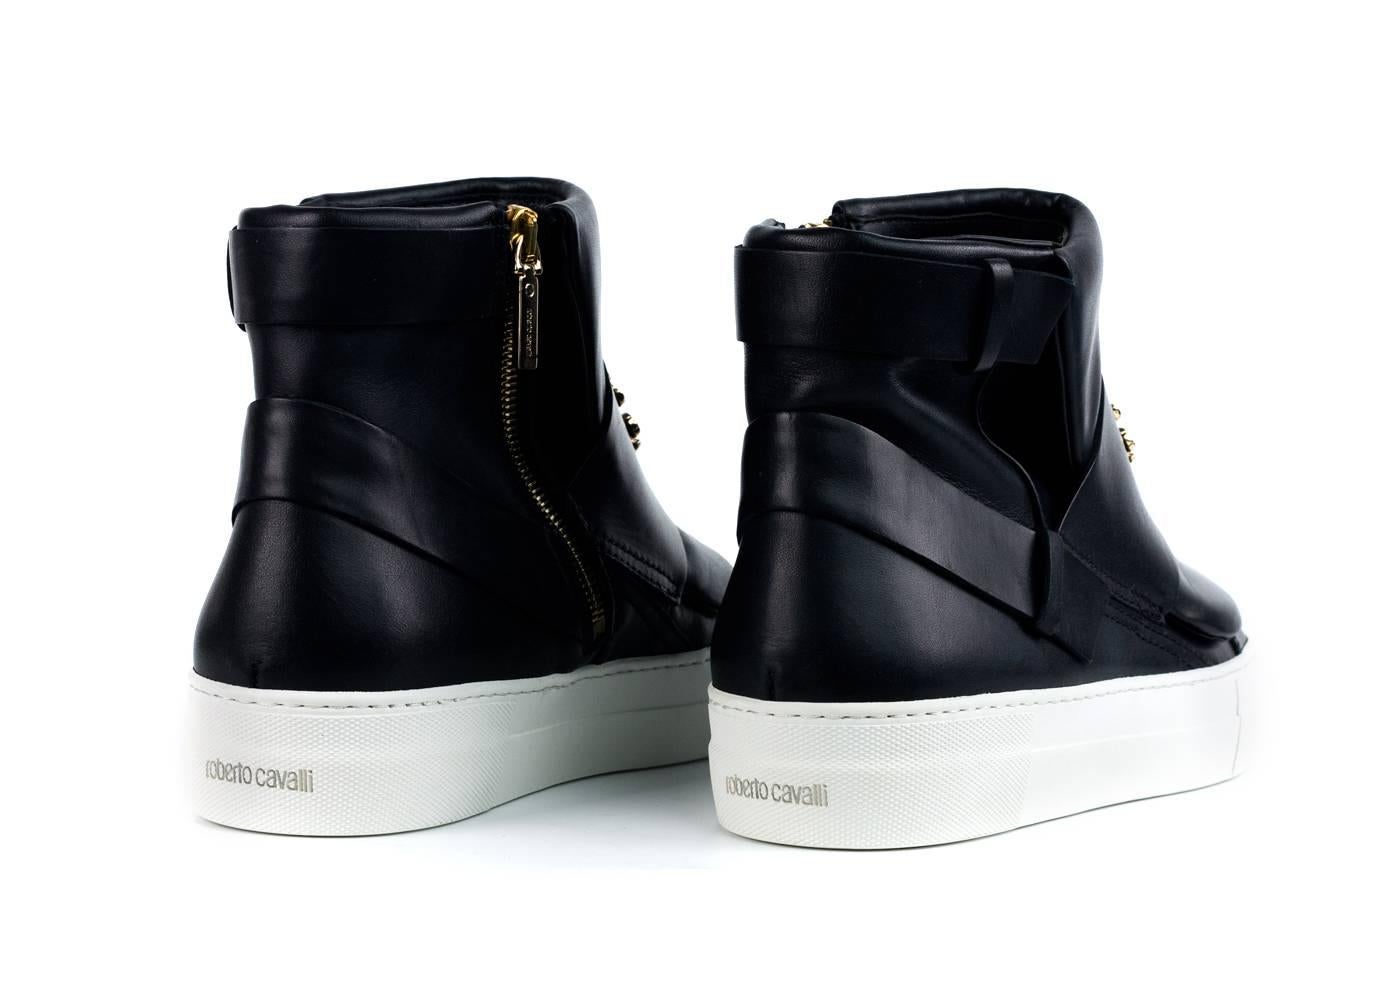 Brand New Roberto Cavalli Sneakers
Original Box & Dust Bag Included
Retails in Stores & Online for $880
Size IT39 / US9 Fits True to Size

Black leather  zipped hi-top sneakers from Roberto Cavalli are a major fashion statement for footwear. These